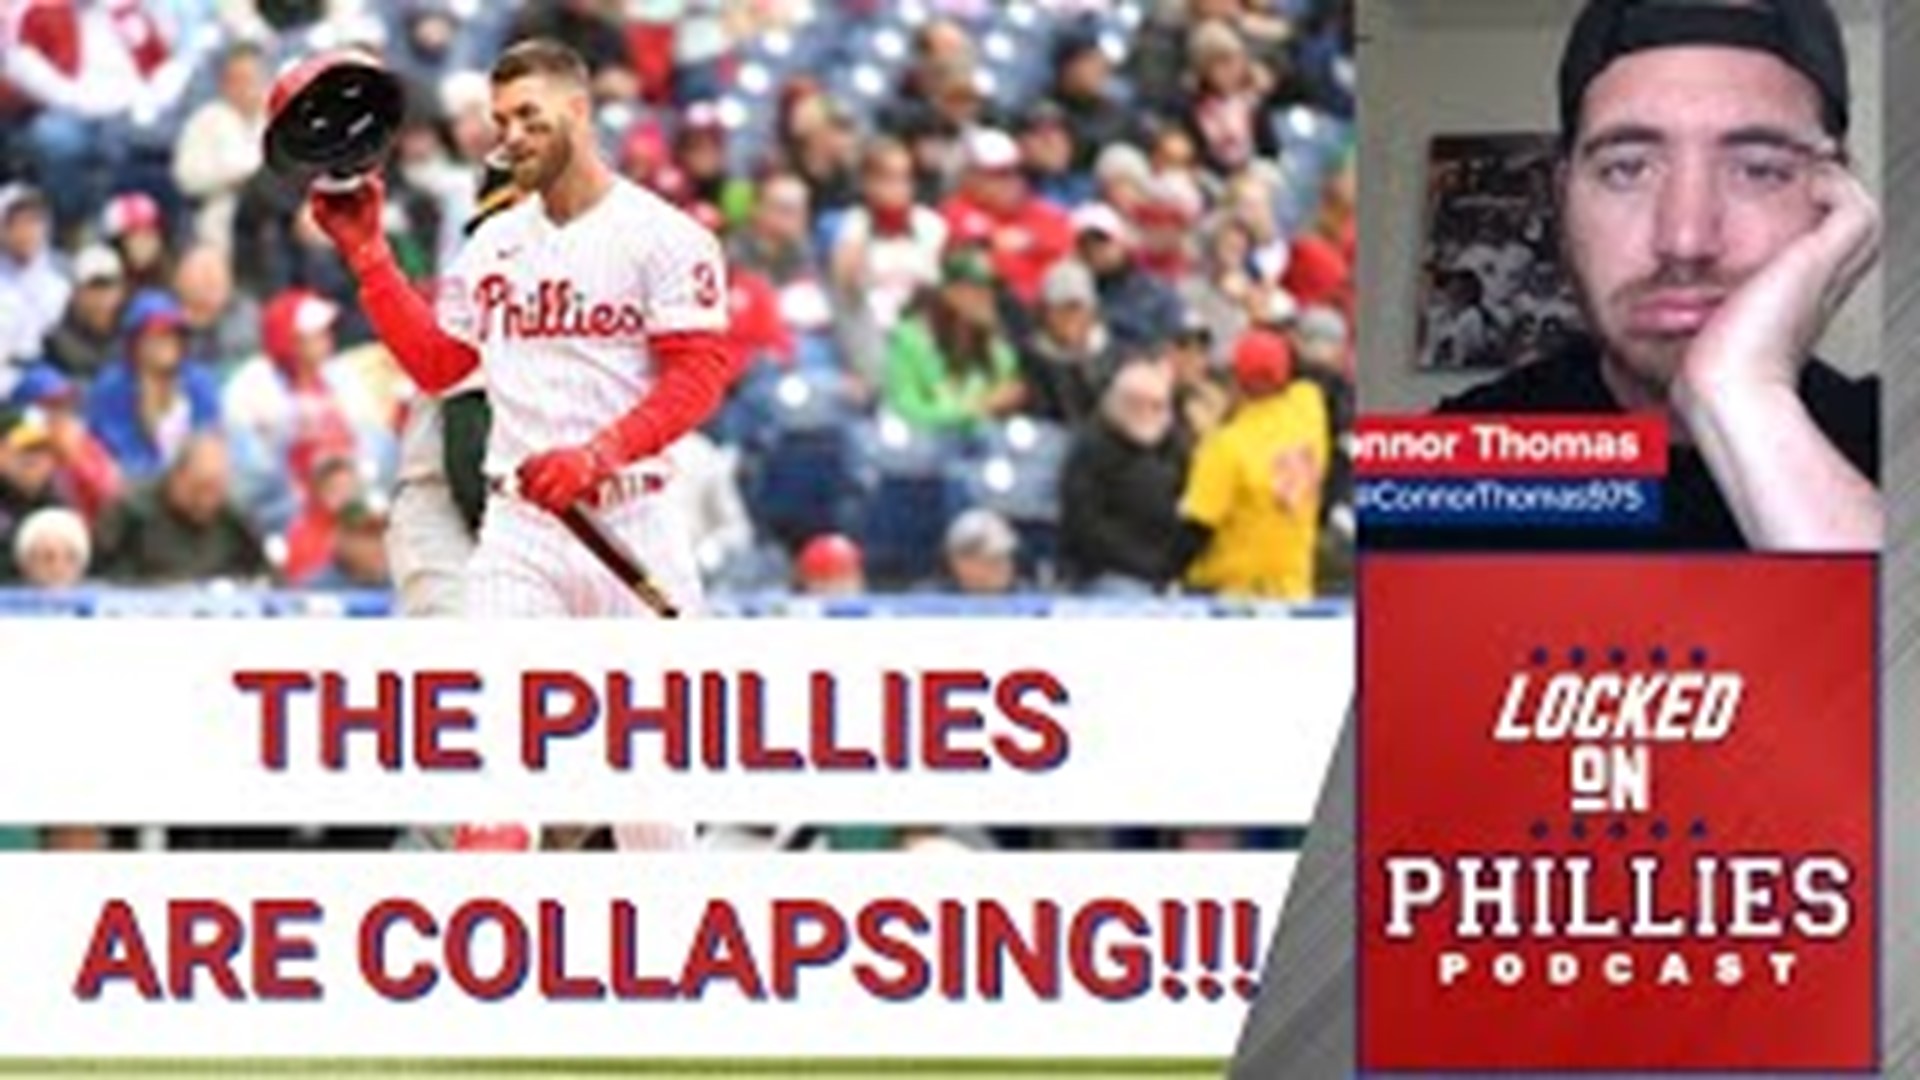 In today's episode, Connor is distraught as he discusses another Philadelphia Phillies loss to the Chicago Cubs.